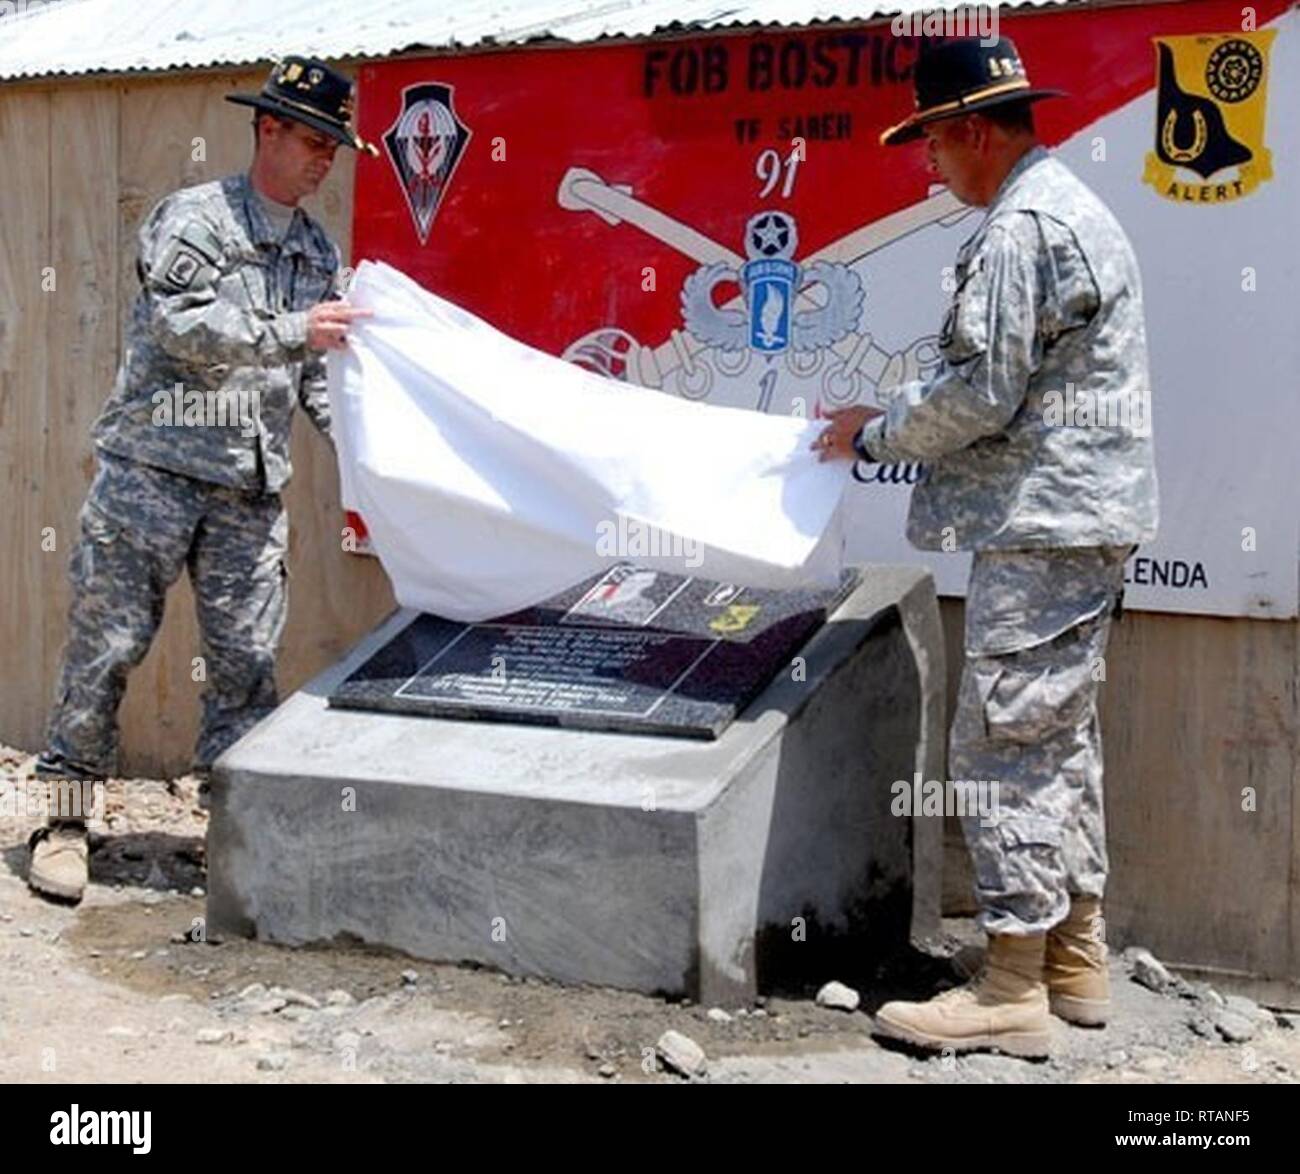 Members of the 173rd Airborne Brigade unveil a plaque and officially name Froward Operating Base Bostick in honor of Maj. Thomas G. Bostick, killed in action in 2007 while commanding Bulldog Troop, 1st Squadron, 91st Cavalry Regt. Stock Photo